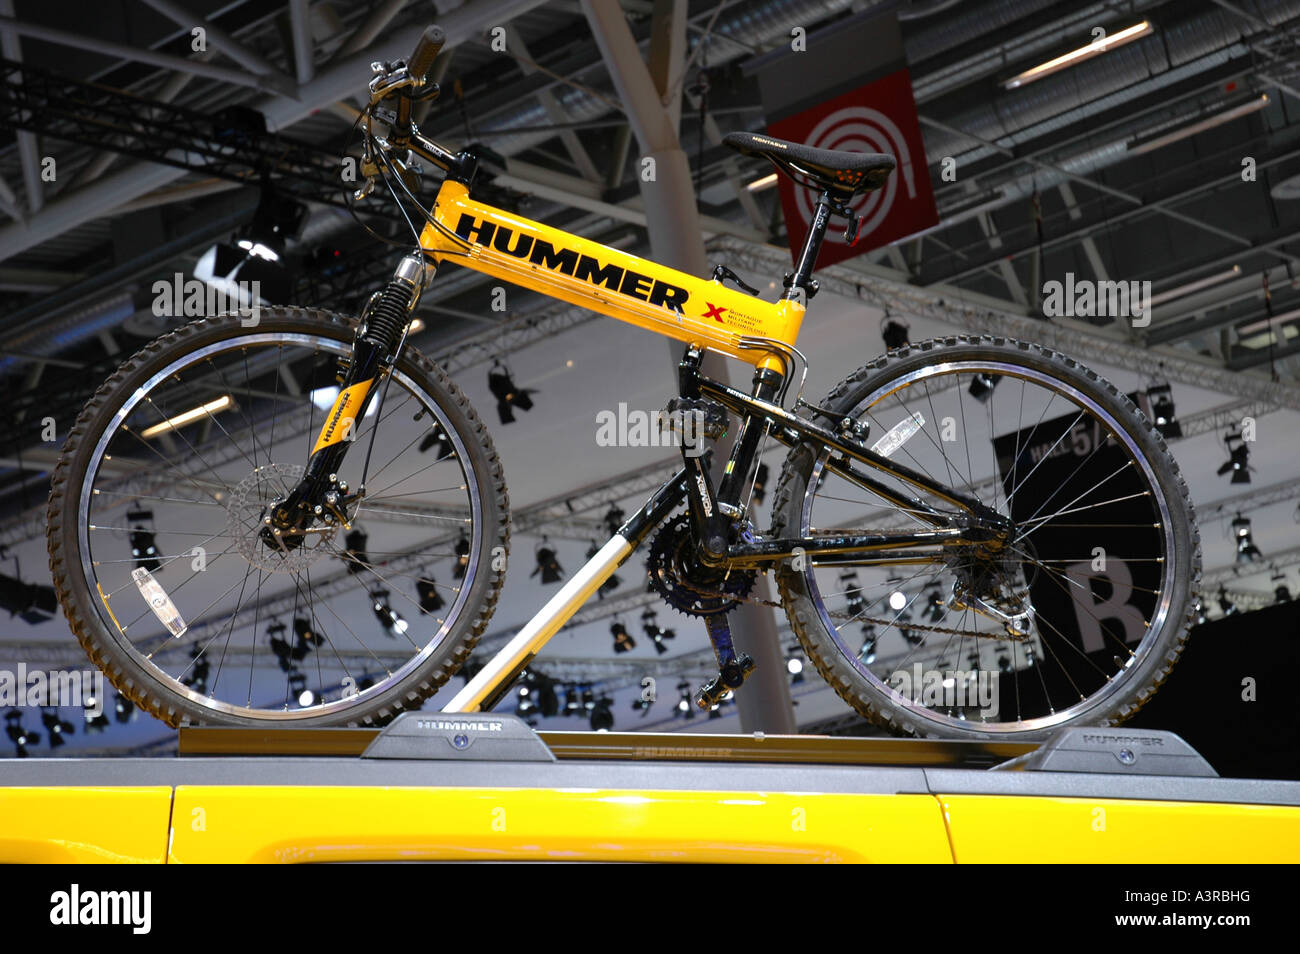 Paris Motor Show France Hummer H3 bike on the roof Stock Photo - Alamy